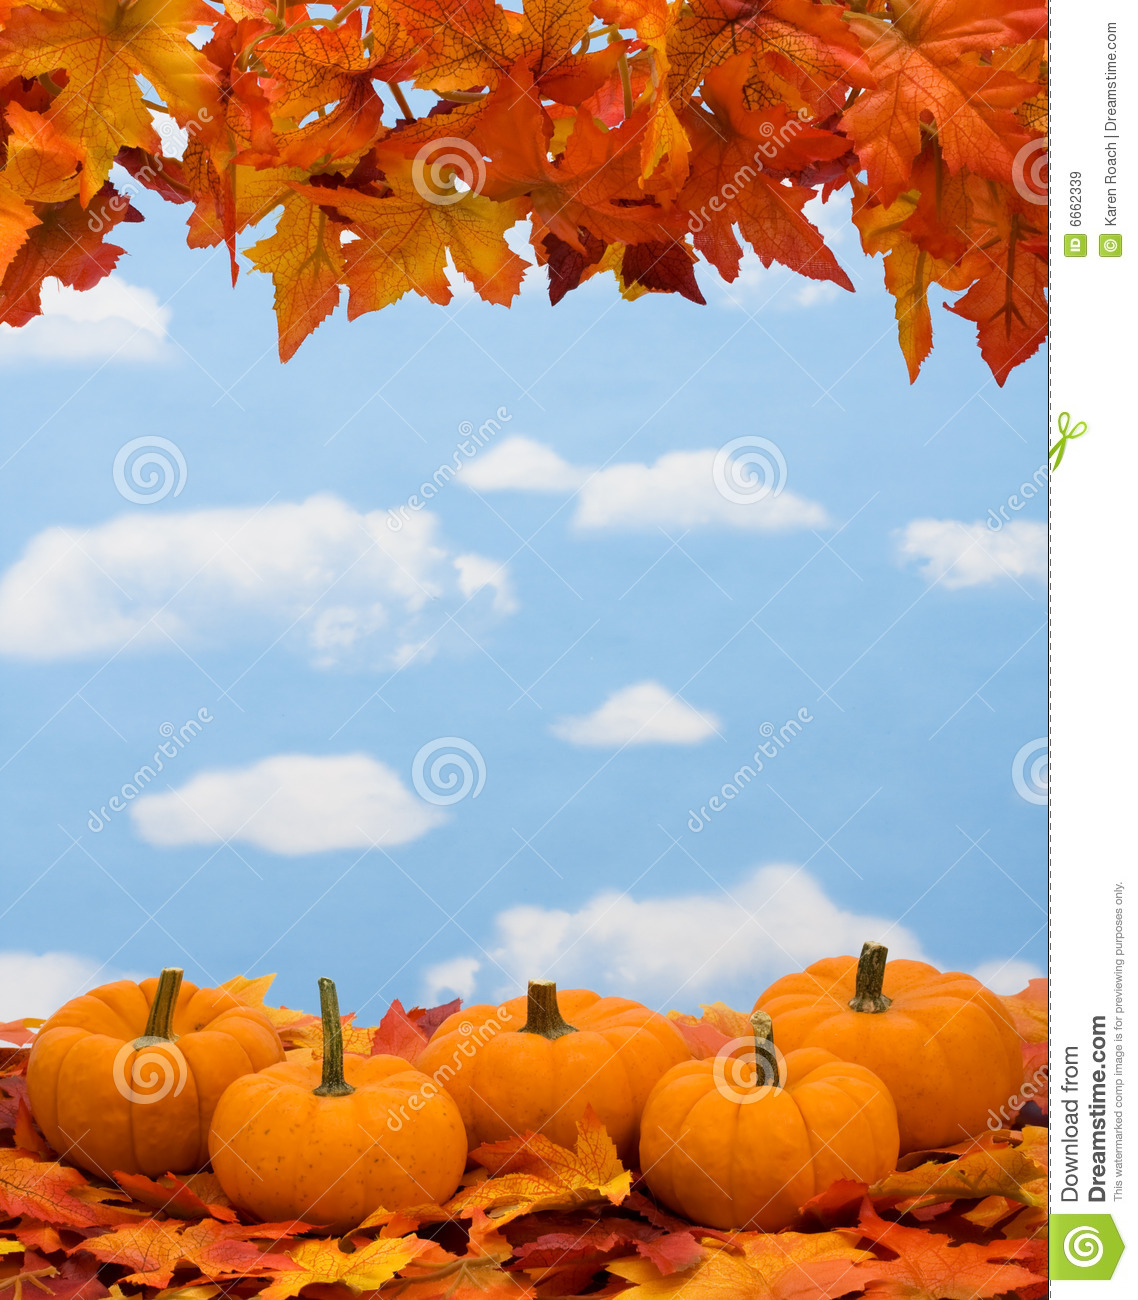 Fall Leaves With Pumpkin On Sky Background Fall Harvest